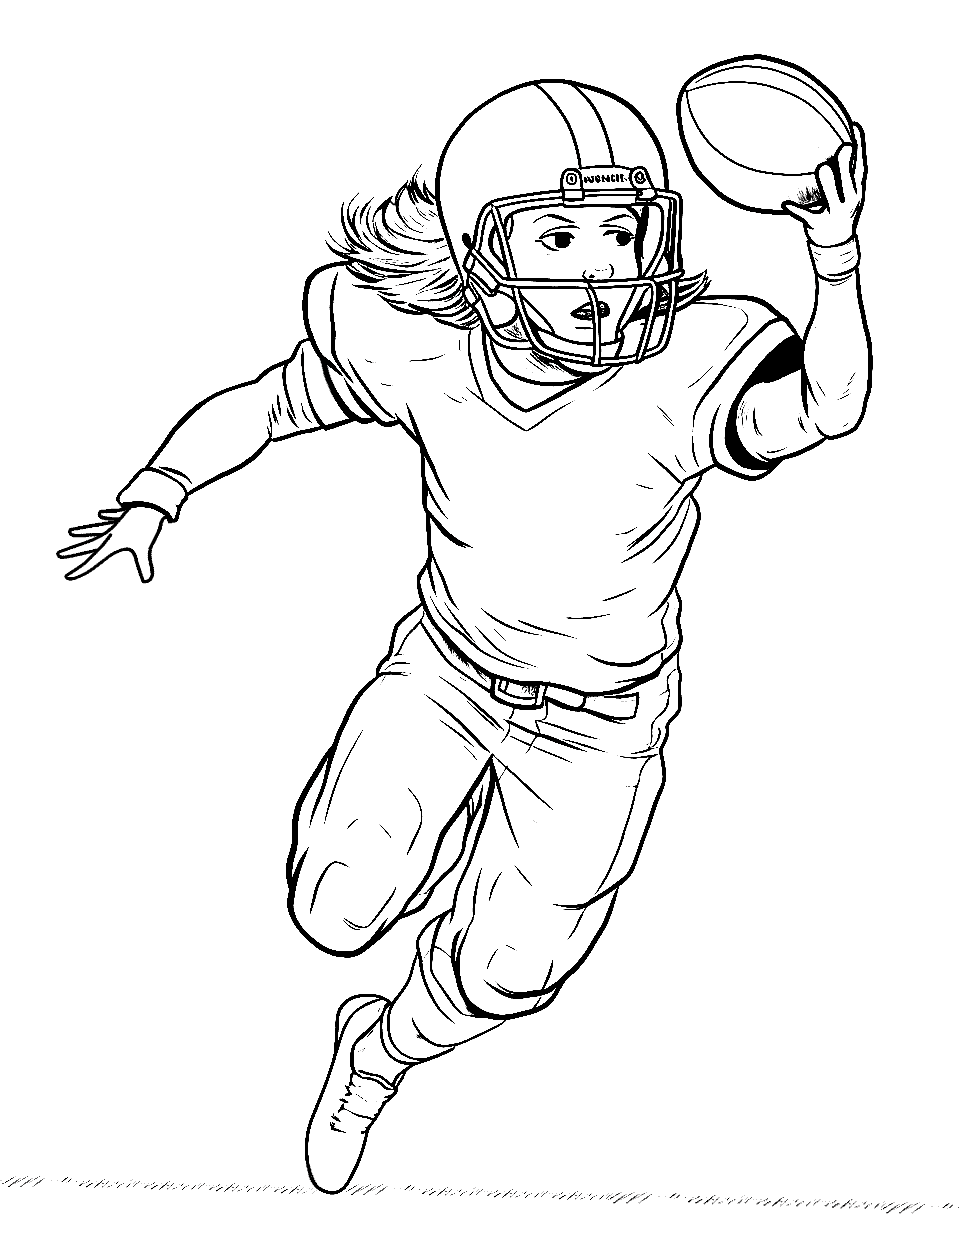 Rushing Forward Coloring Page - A player rushing and leaping forward to catch a football.